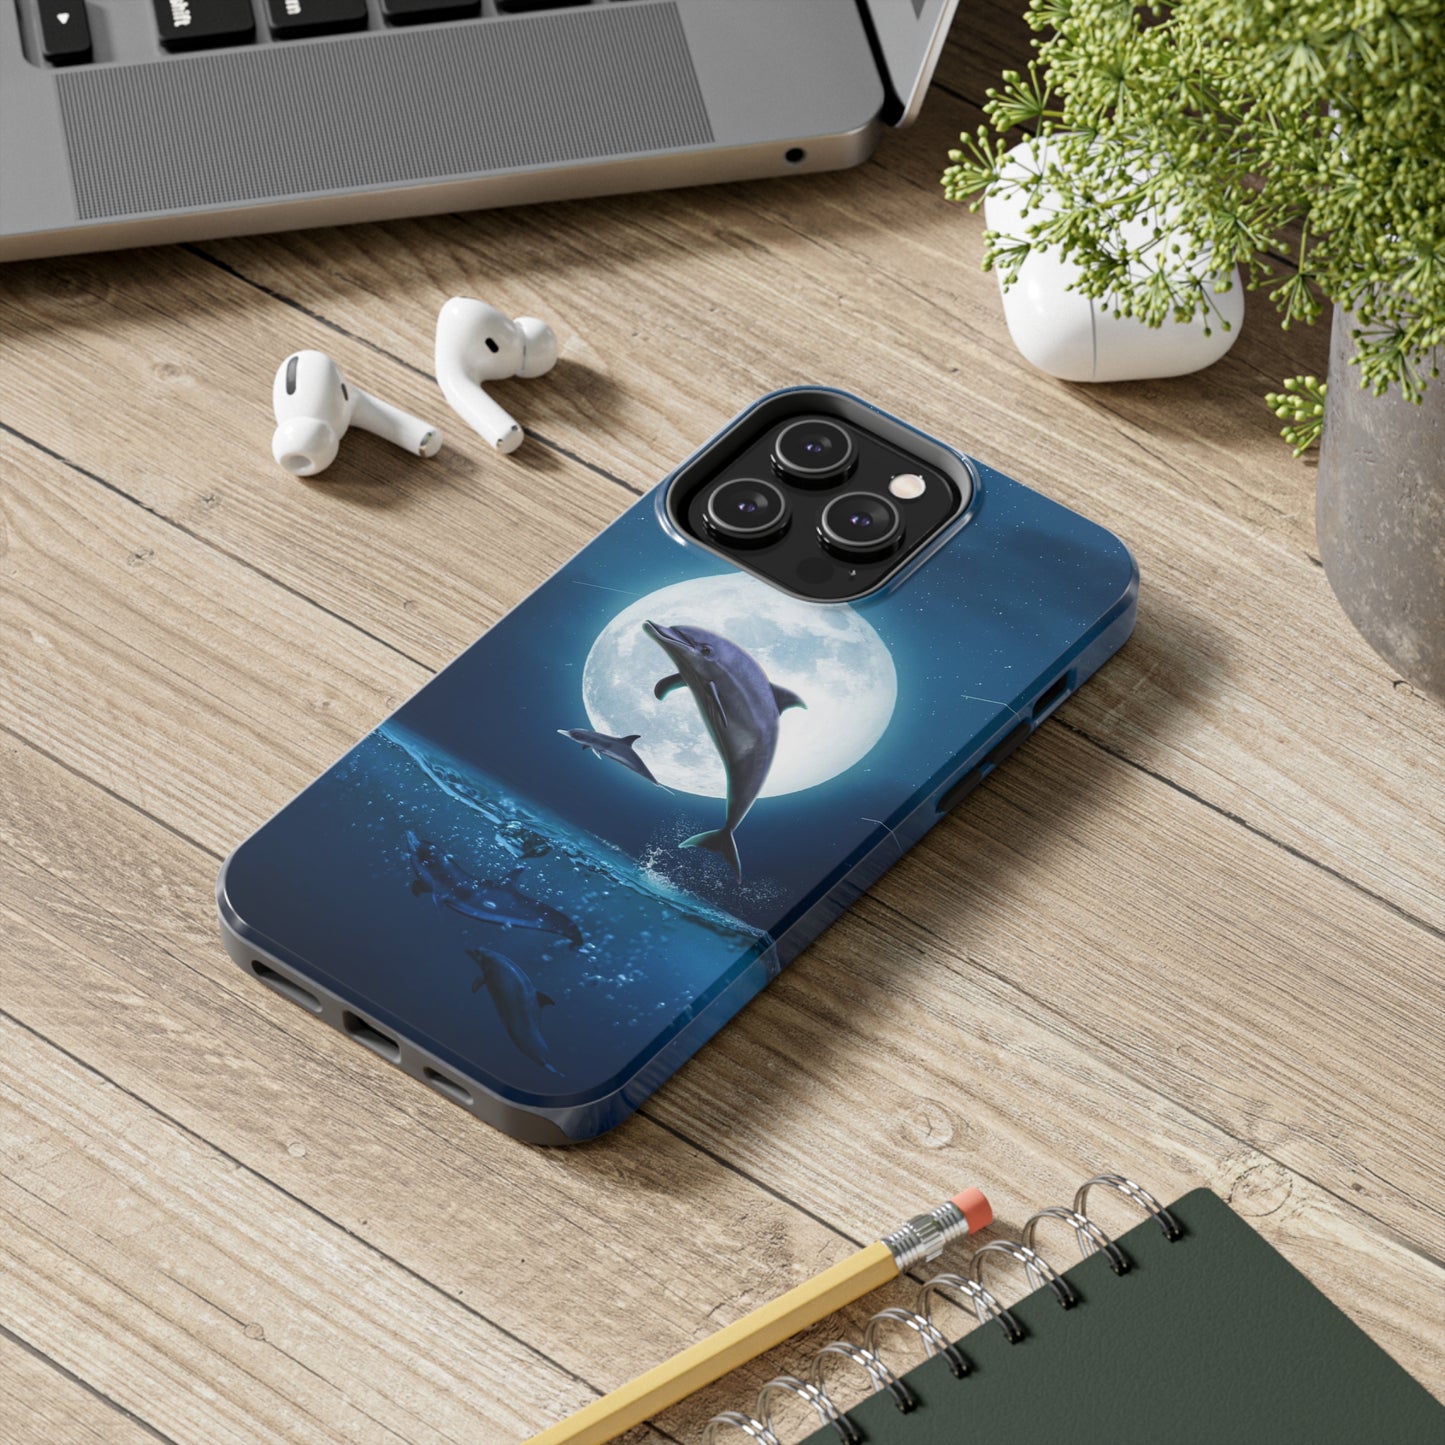 Dolphin over the moon  - Tough Phone Cases